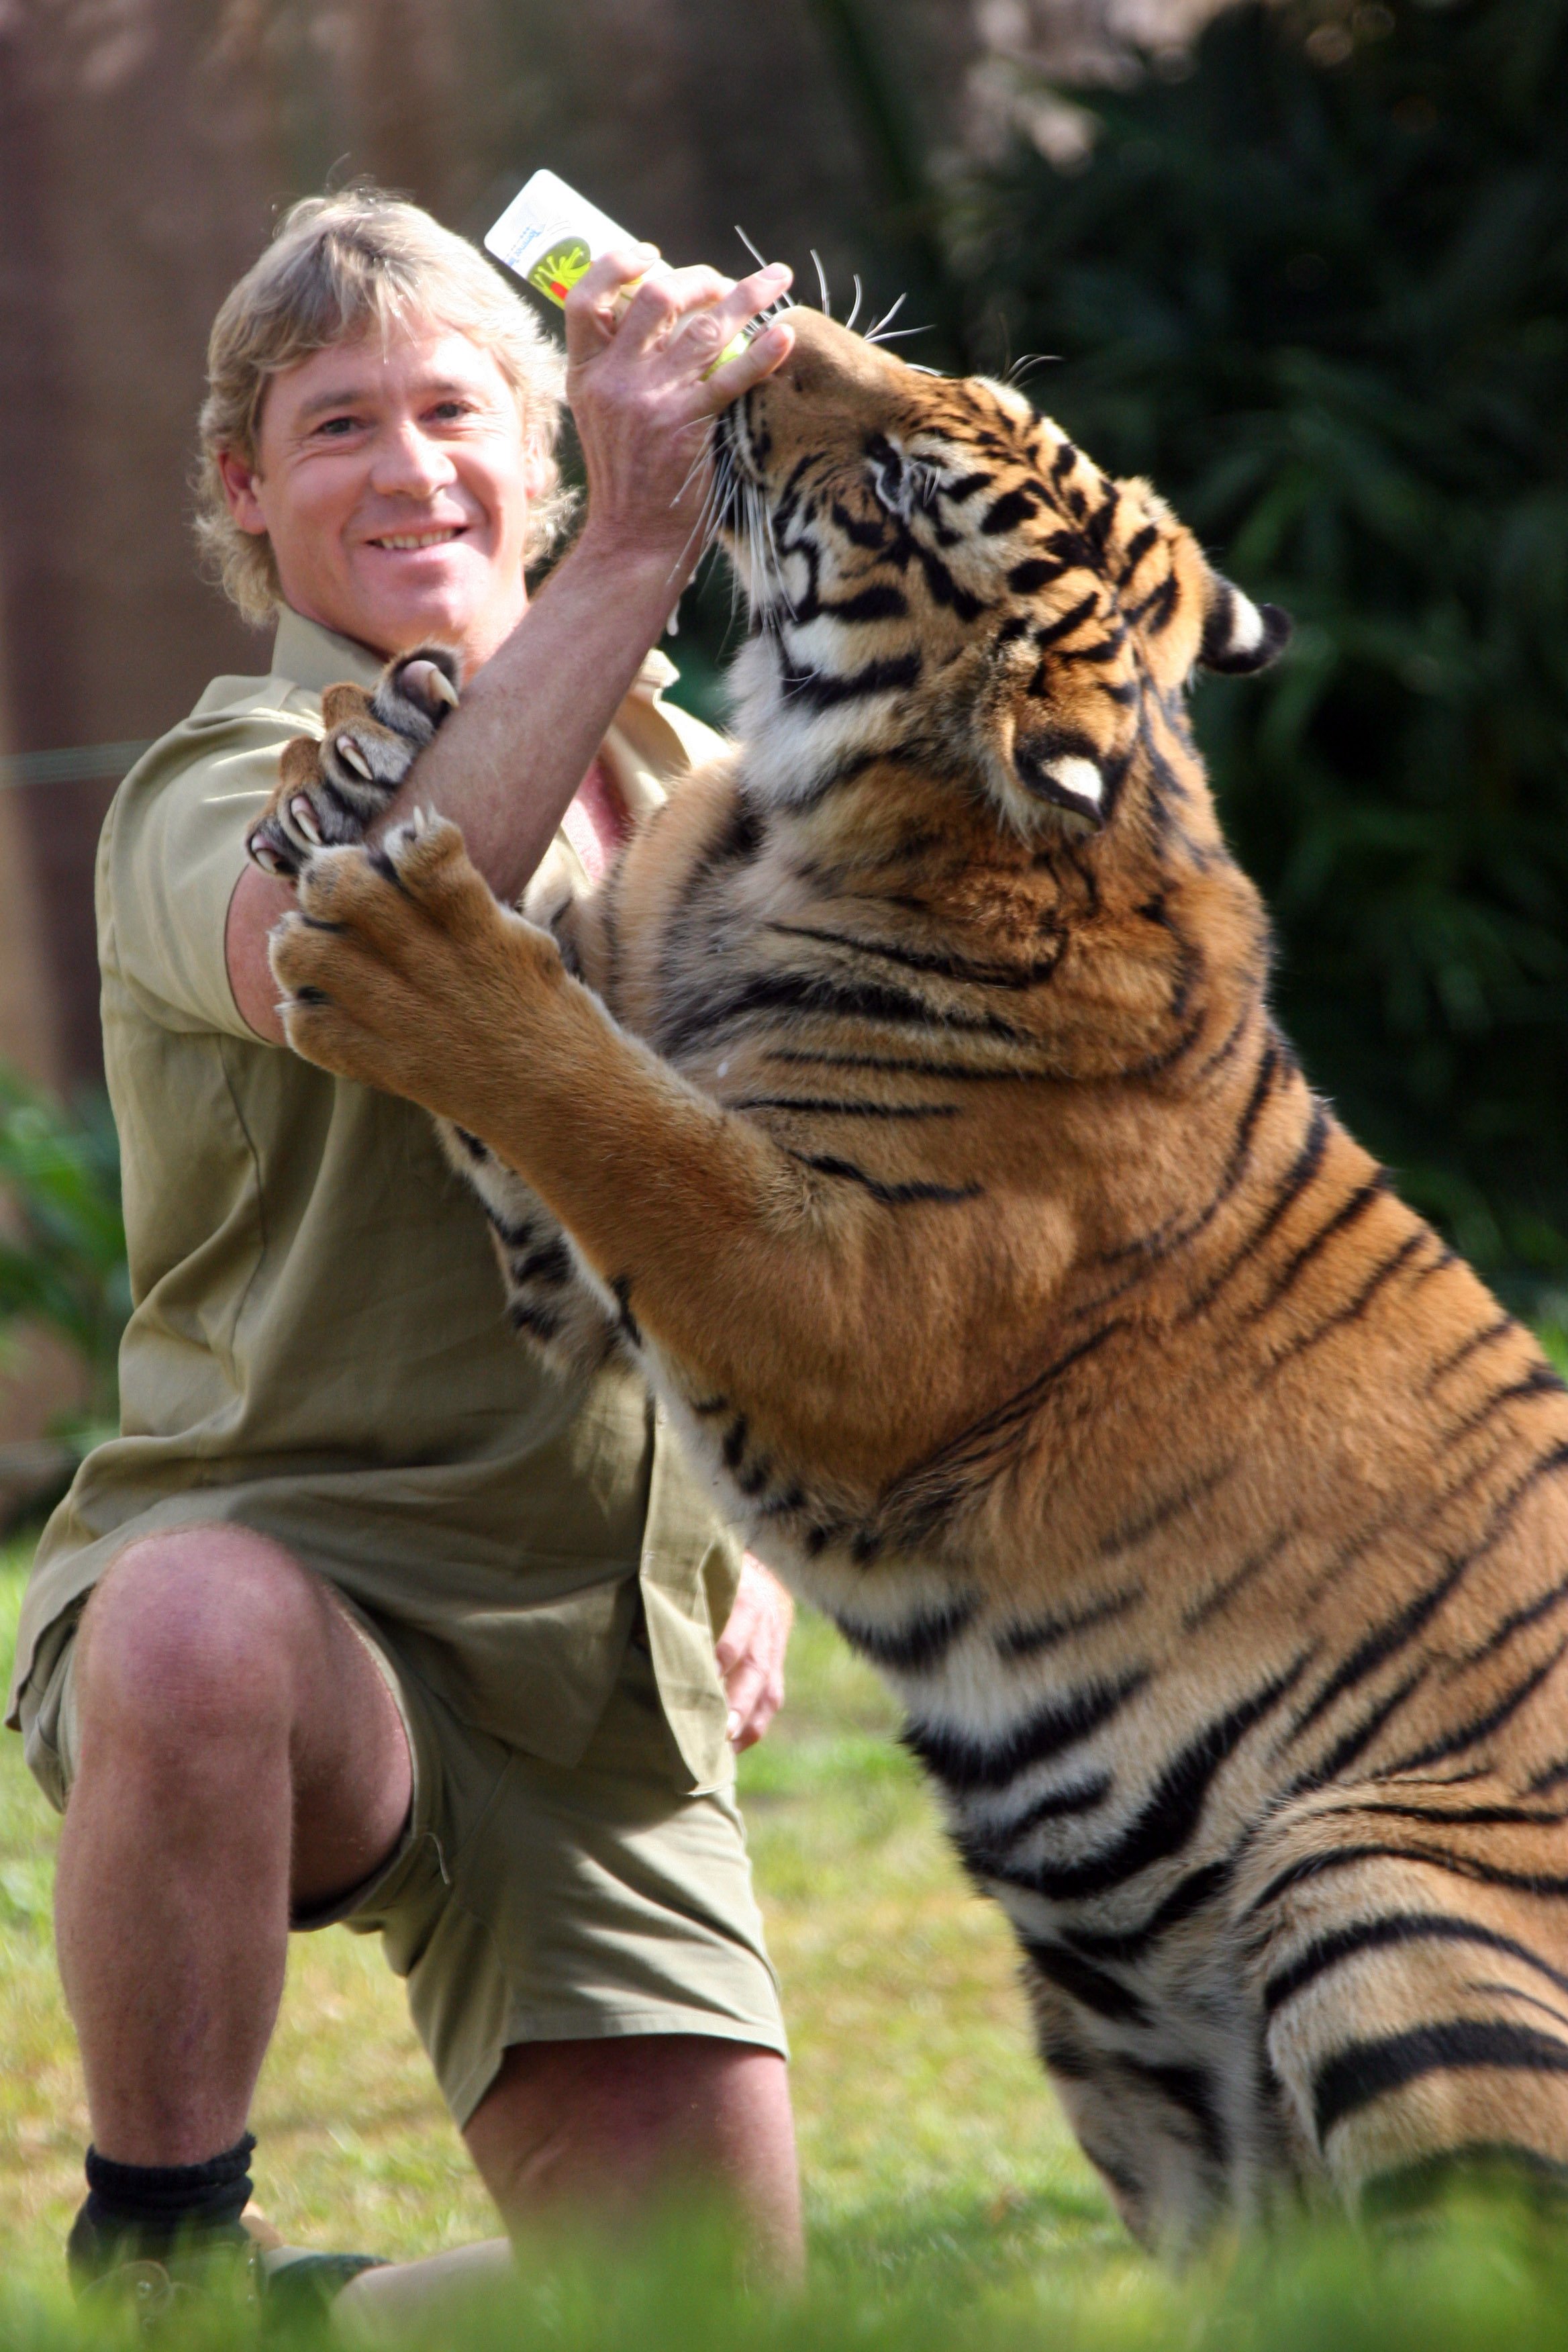  Steve Irwin poses with a tiger at Australia Zoo June 1, 2005 in Beerwah, Australia | Photo: GettyImages